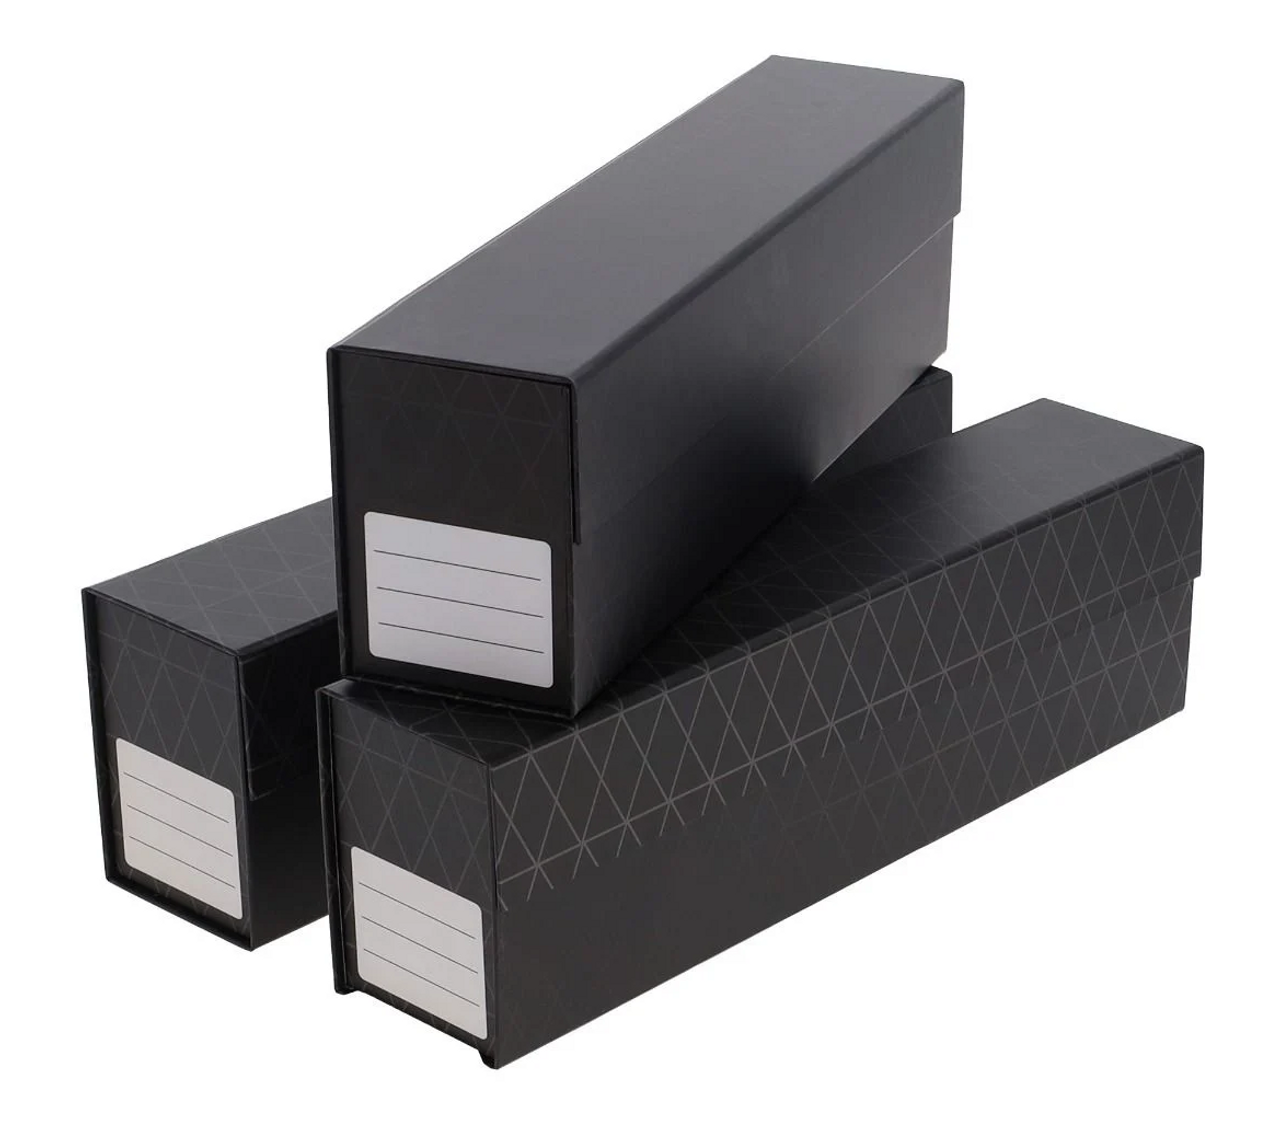 BCW QuickFold Card Box 3ct Pack